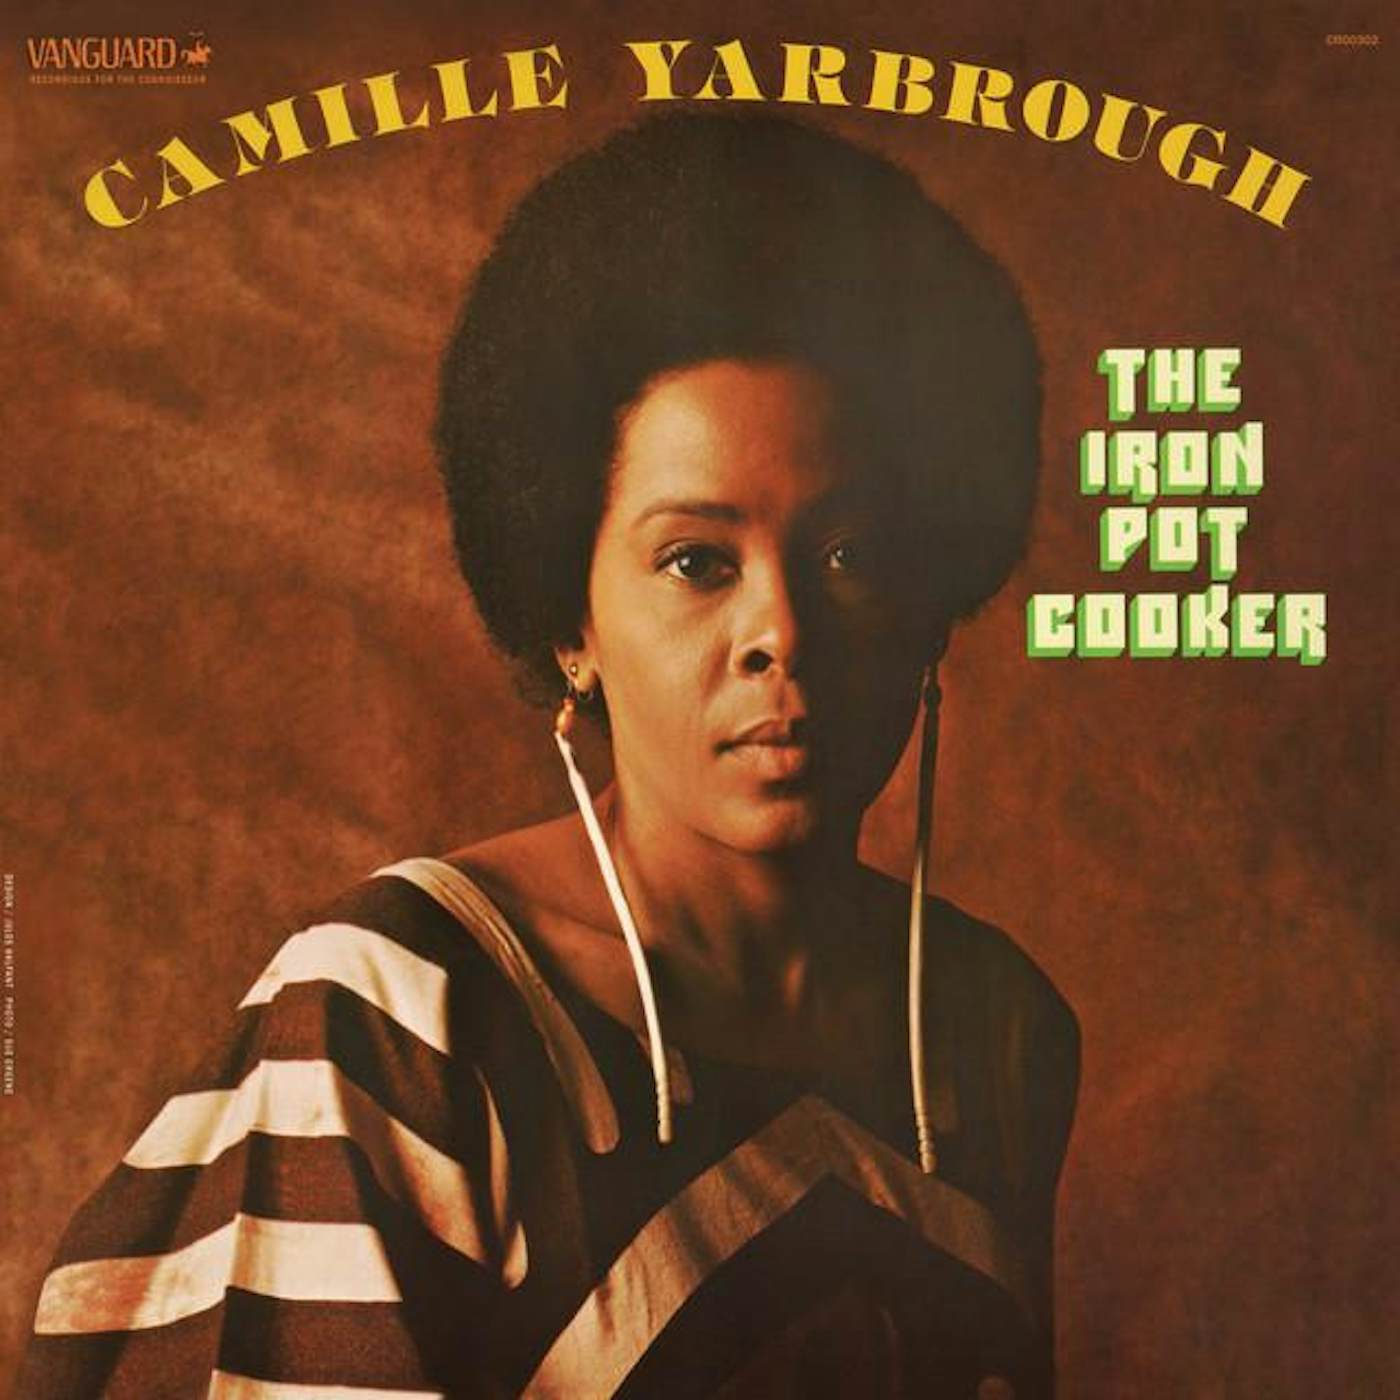 Camille Yarbrough